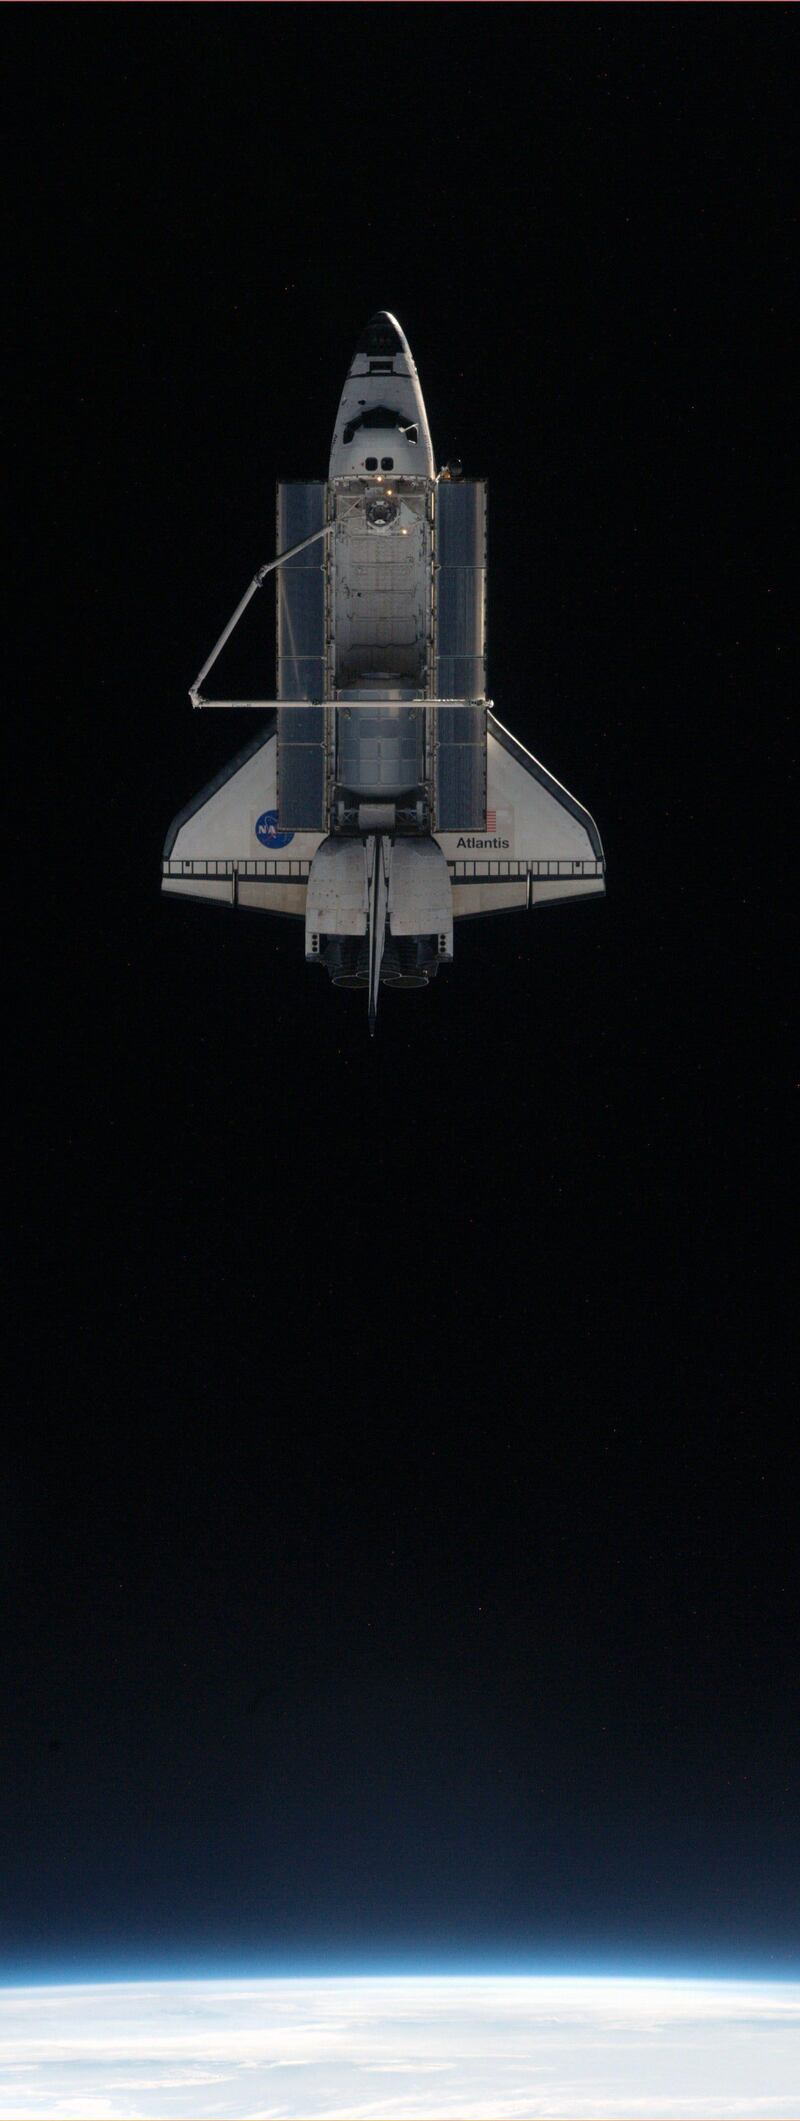 This image provided by NASA shows the space shuttle Atlantis photographed from the International Space Station as the orbiting complex and the shuttle performed final separation in the early hours of Tuesday July 19, 2011. (AP Photo/NASA) *** Local Caption ***  Space Shuttle.JPEG-0900e.jpg